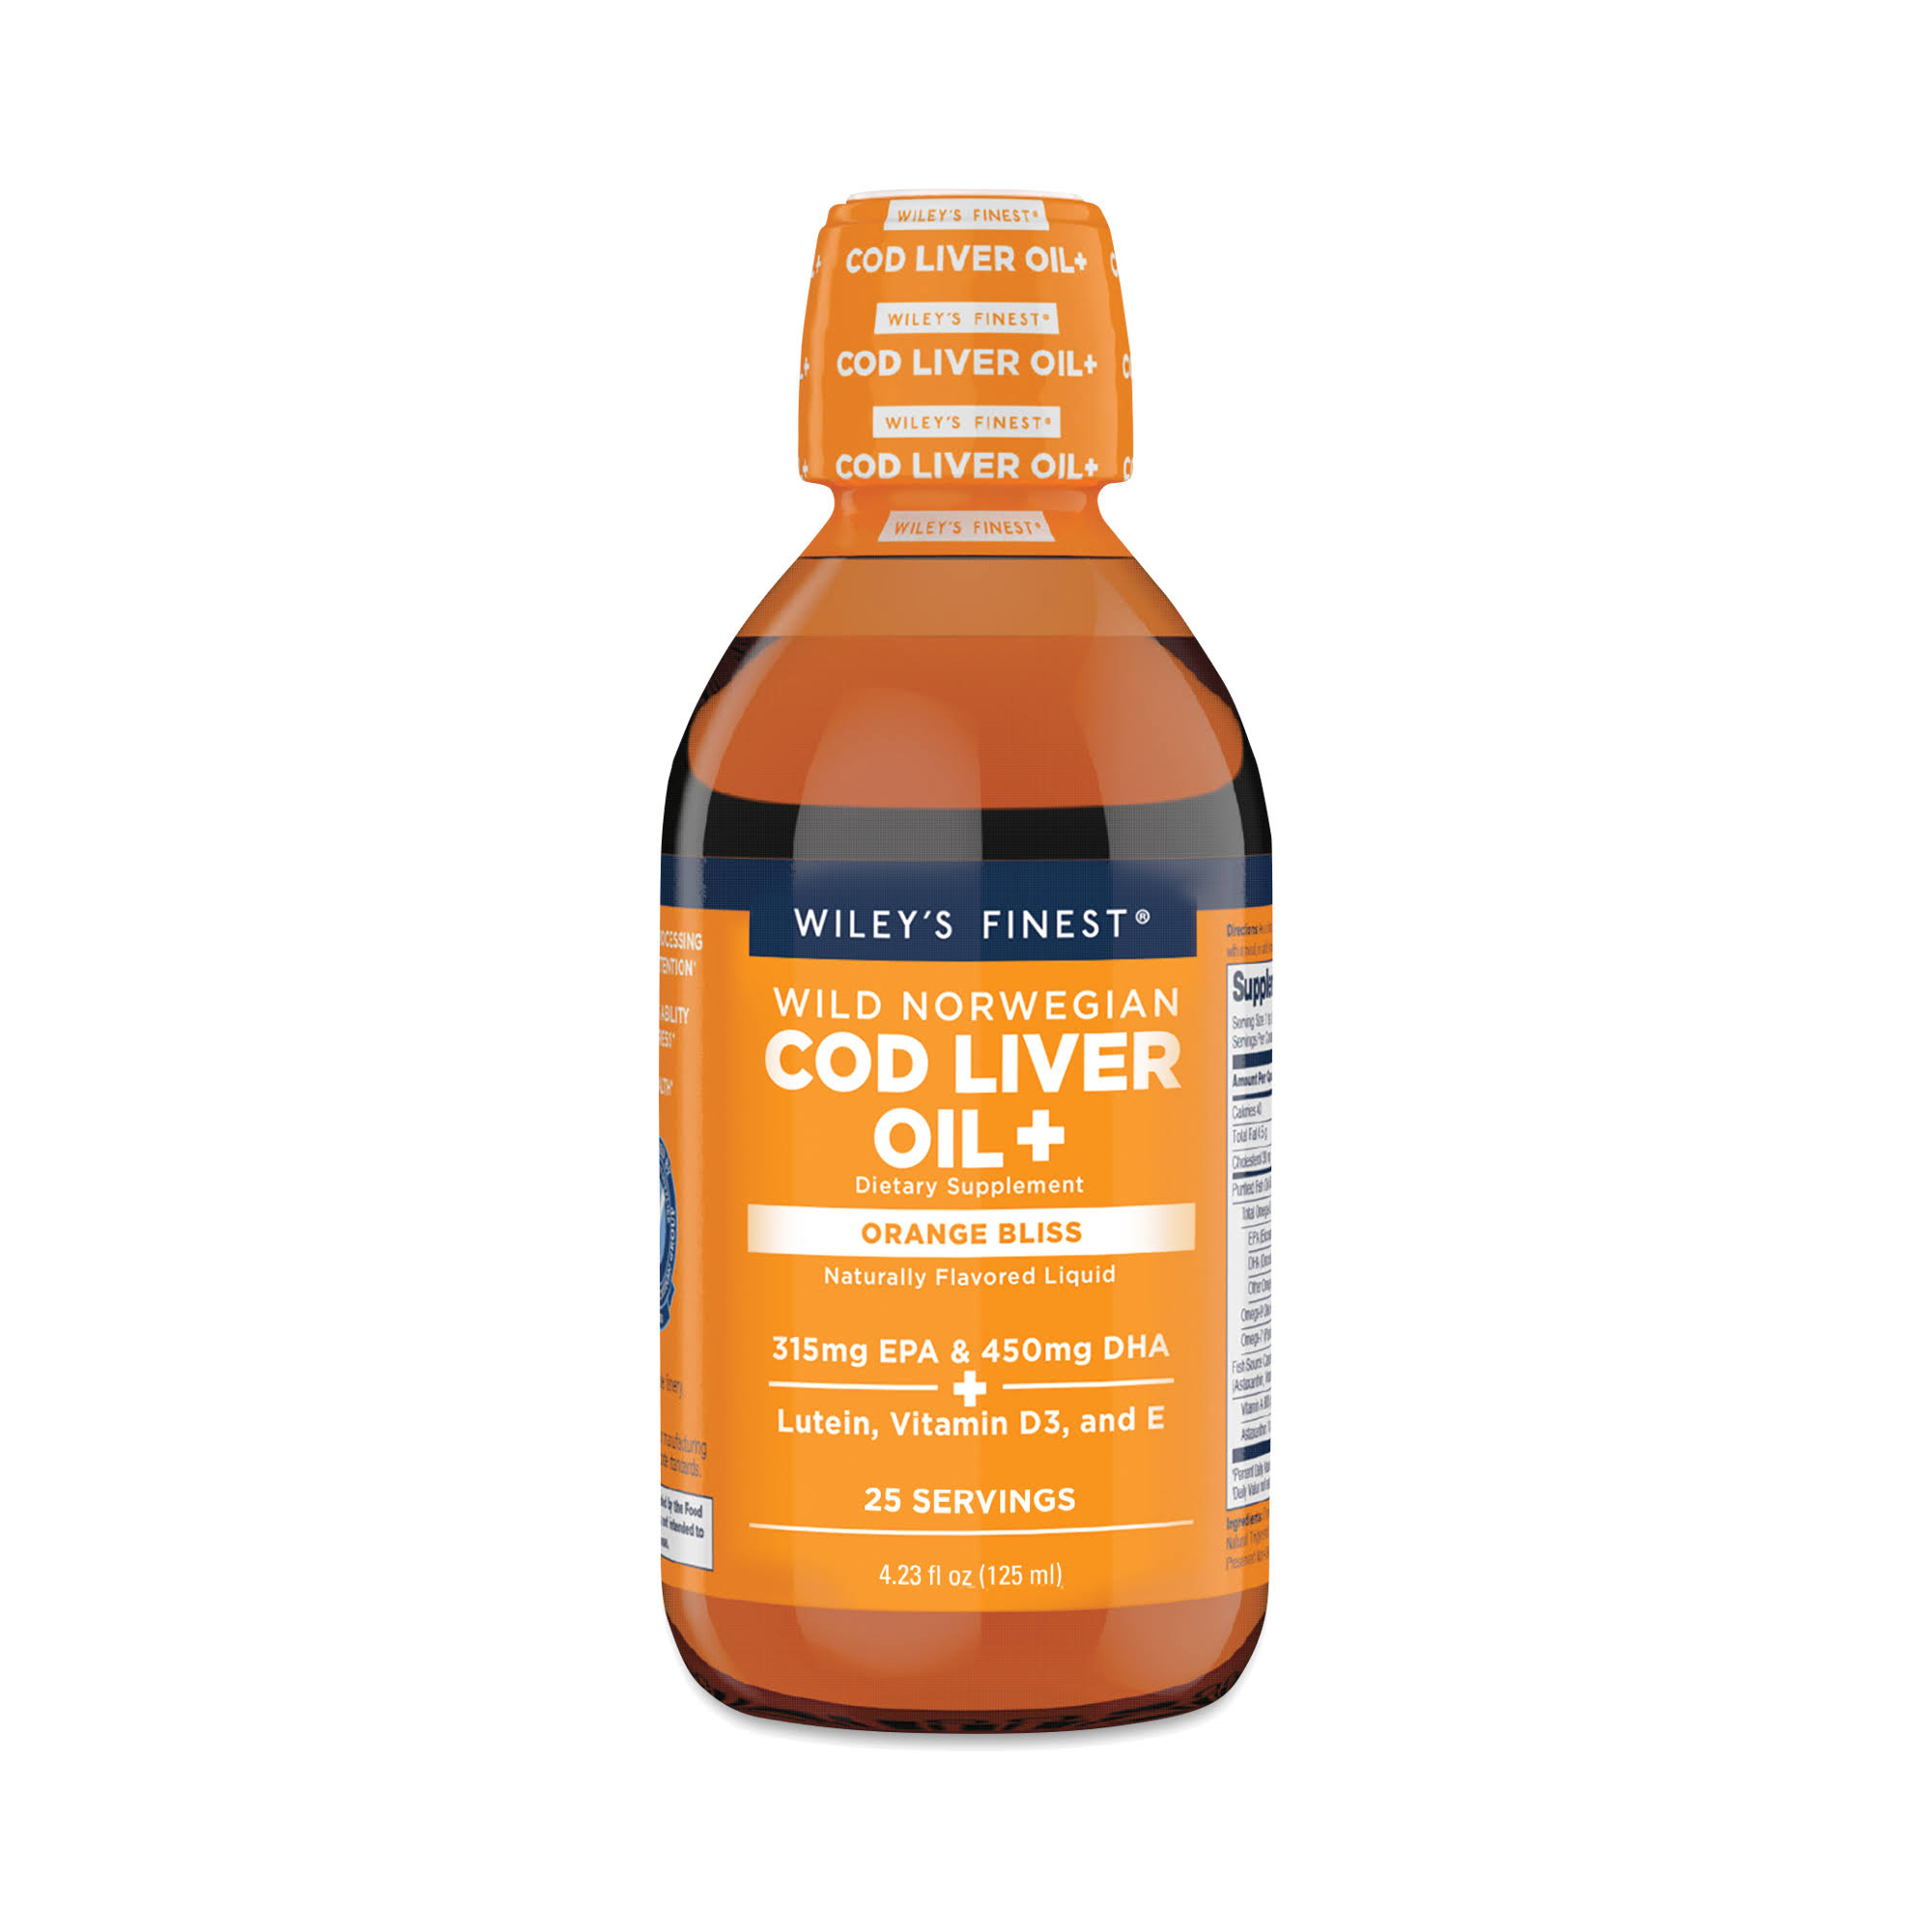 Cod Liver Oil+, 4.23 oz, Wiley's Finest